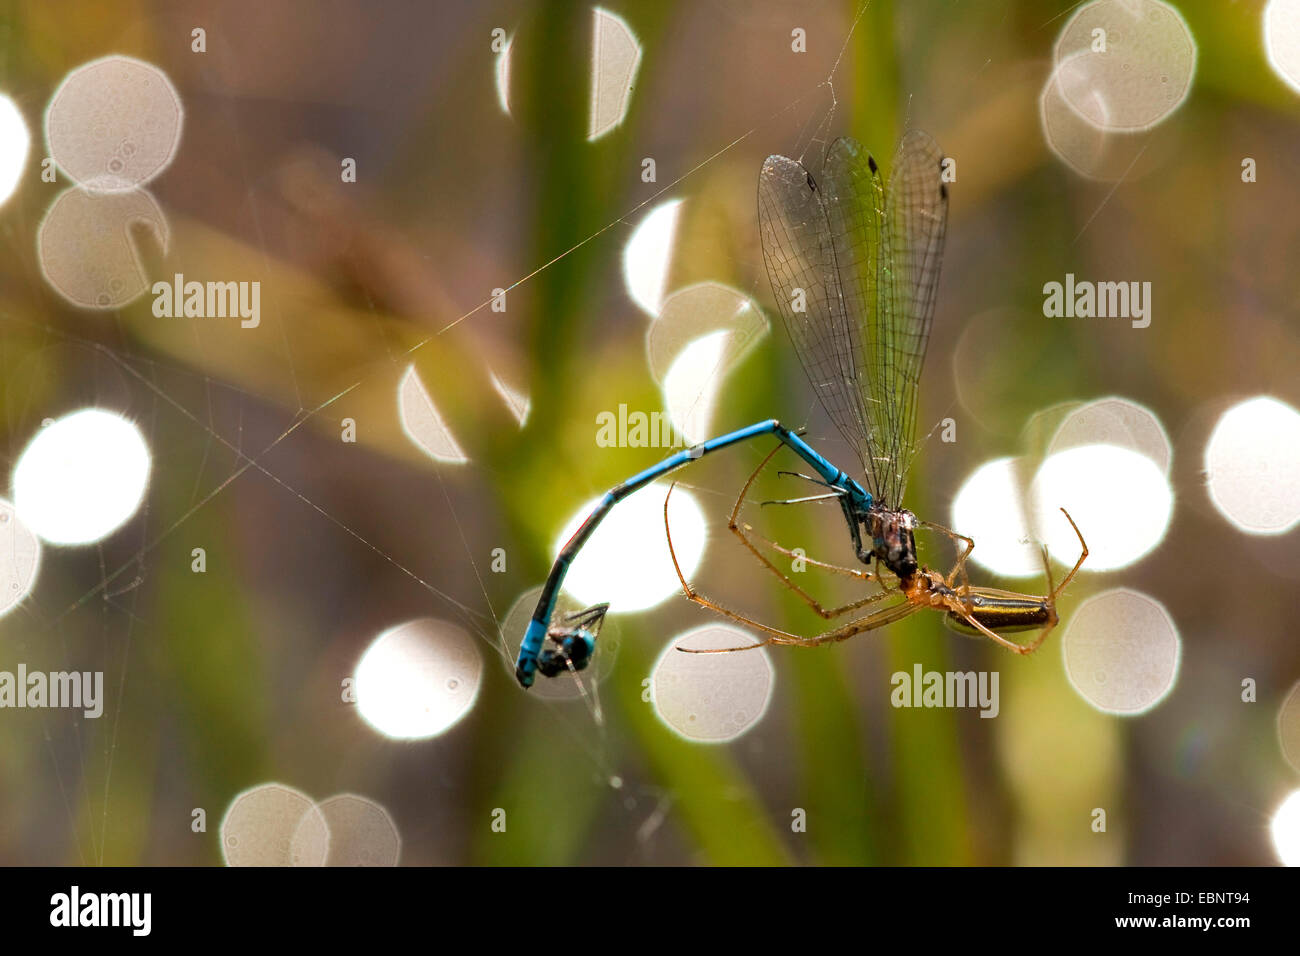 long-jawed spider (Tetragnatha extensa), long-jawed spider having caught a damselfly in her net, Germany, North Rhine-Westphalia Stock Photo